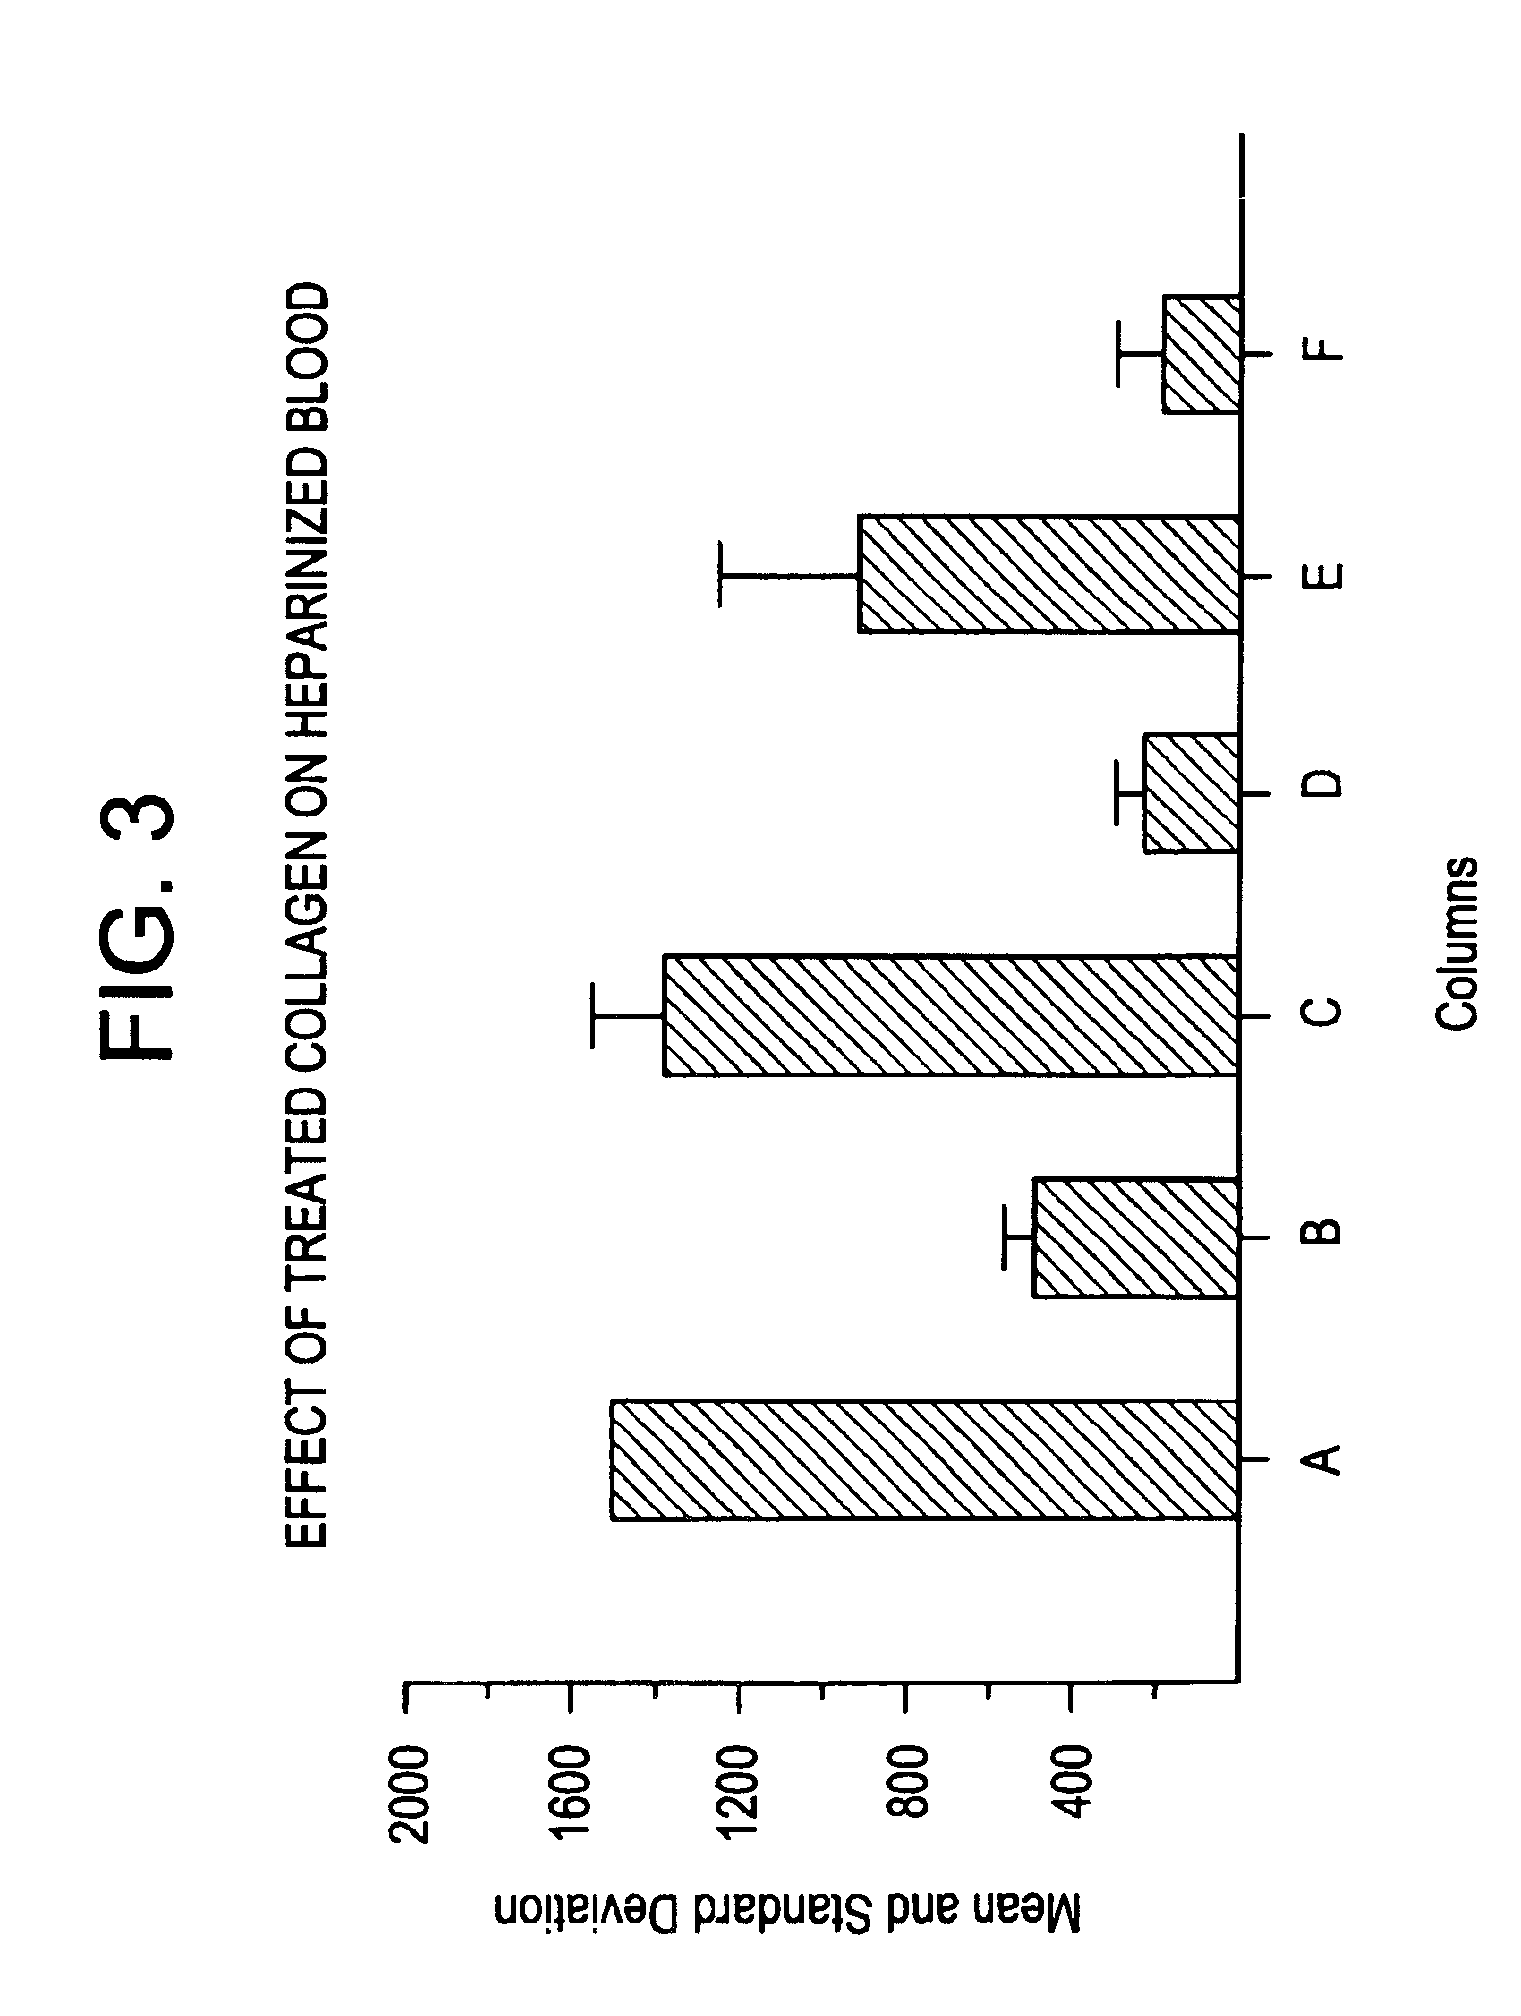 Hemostatic compositions, devices and methods